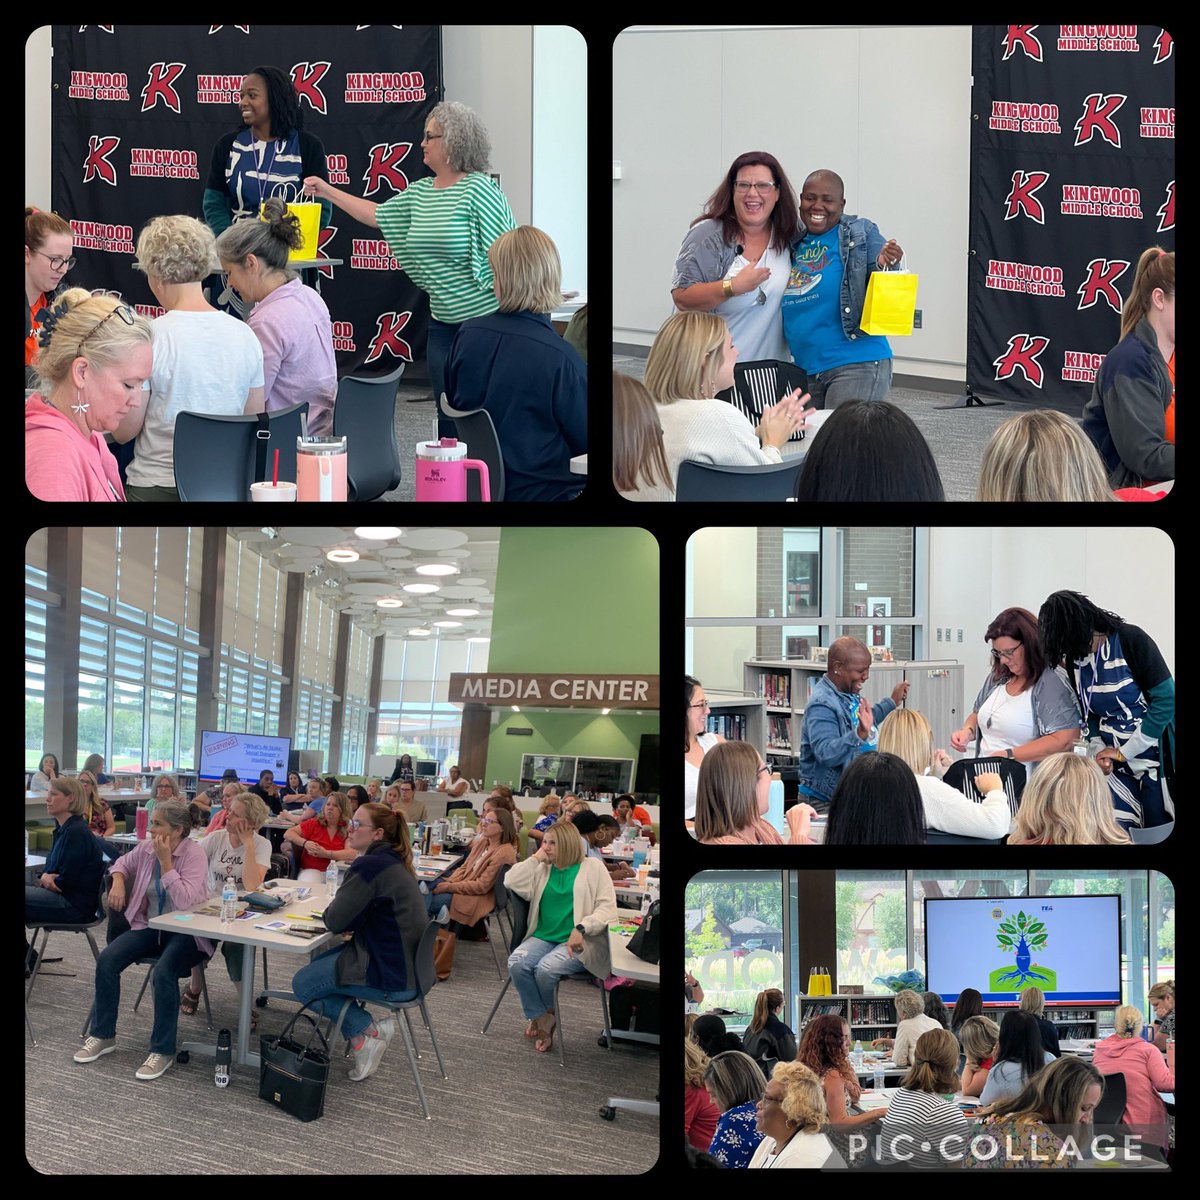 Shout out to @HumbleISD_KMS for hosting with a location change in offering Dyslexia Foundations to our large, fun-loving crowd! Mrs. St. Romain was so excited to win a door prize pulling her own winning ticket! #LearningCanBeFun! #SayDyslexia #OneInFive